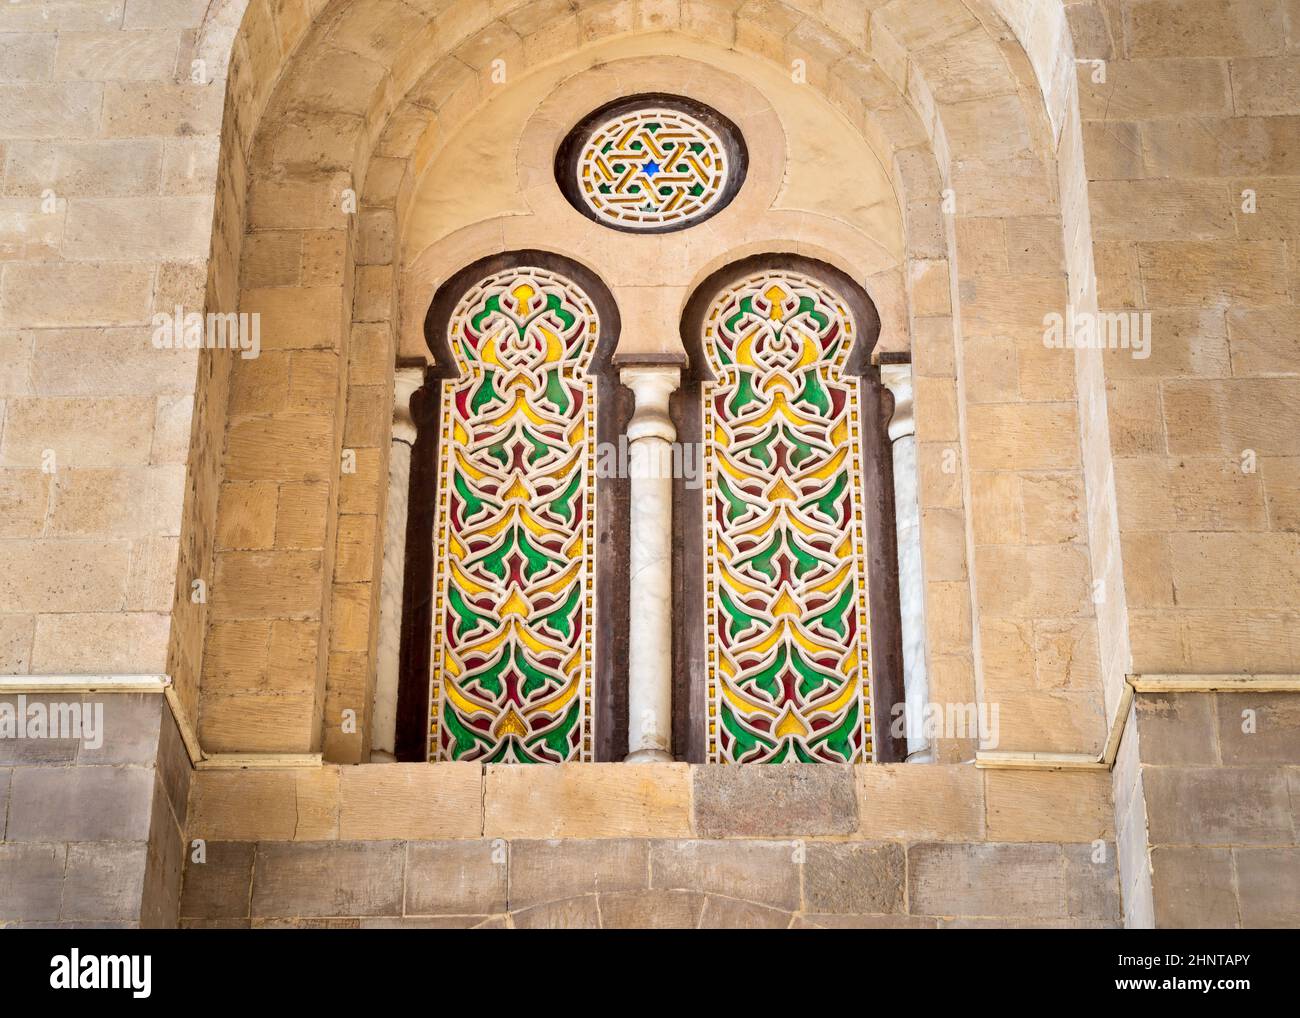 Two external adjacent perforated stucco arched windows with colorful stain glass patterns, at Qalawun complex, Cairo Stock Photo